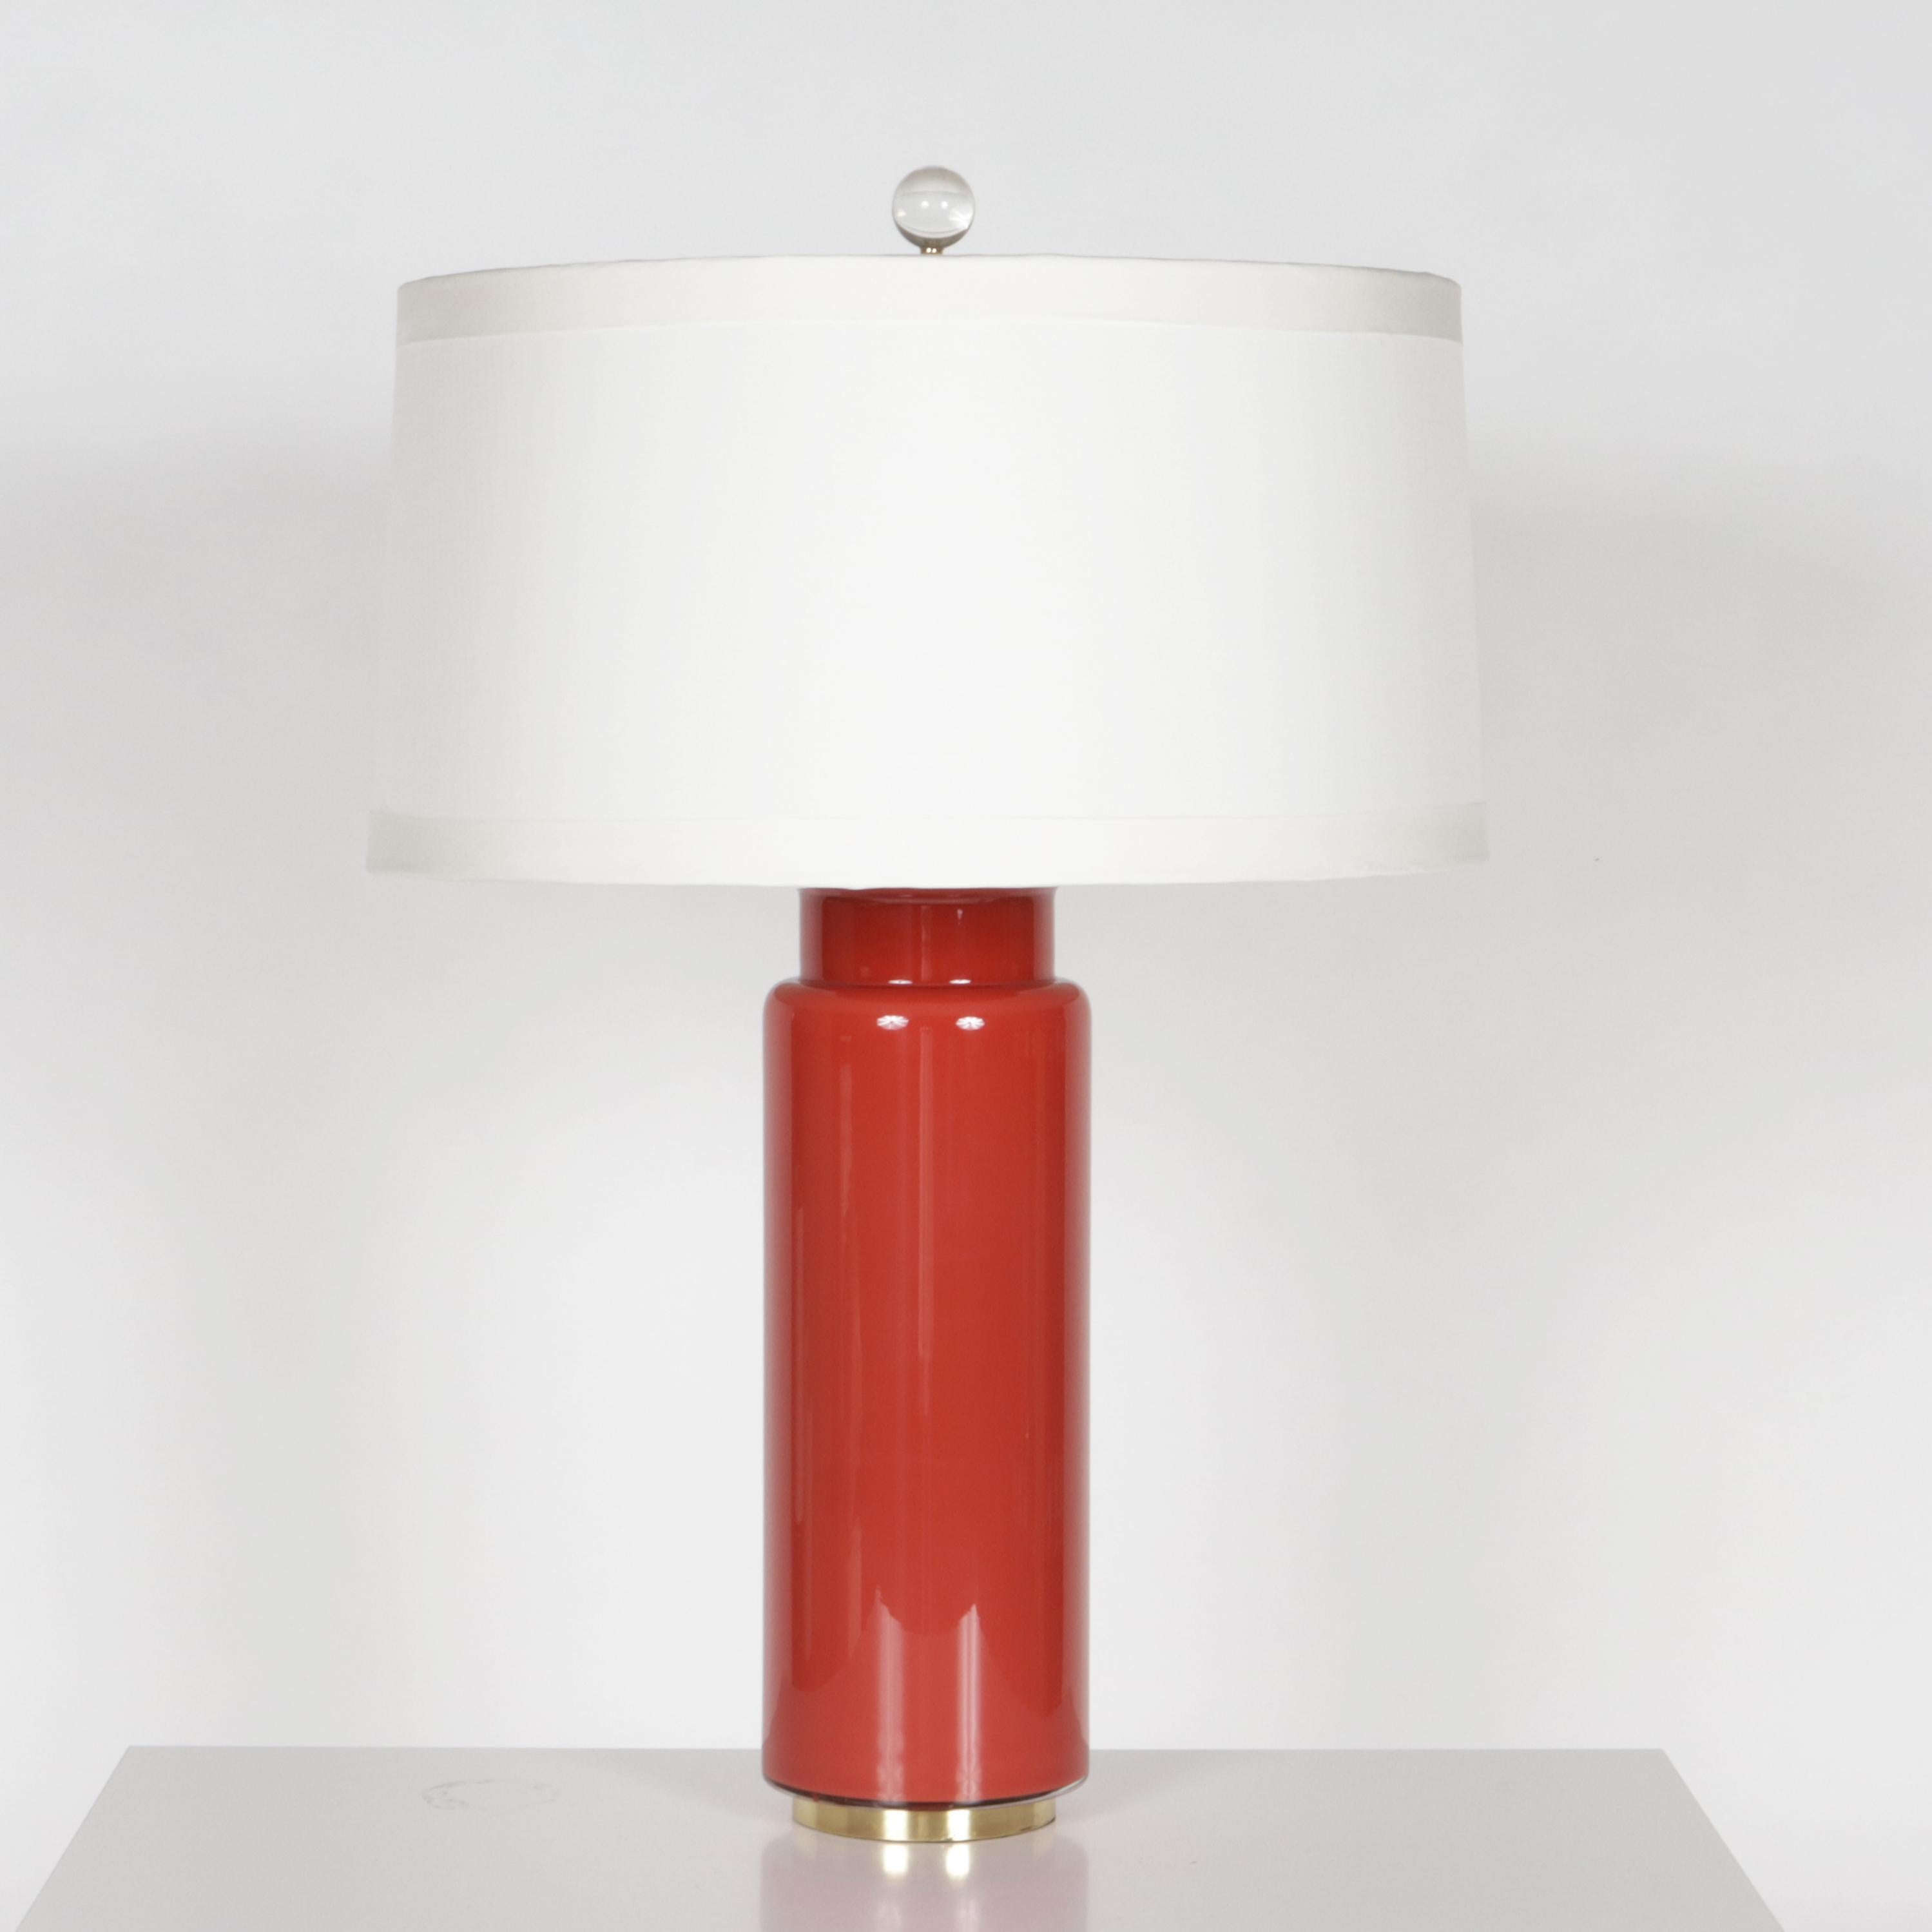 Red glass lamp, c. 1970.